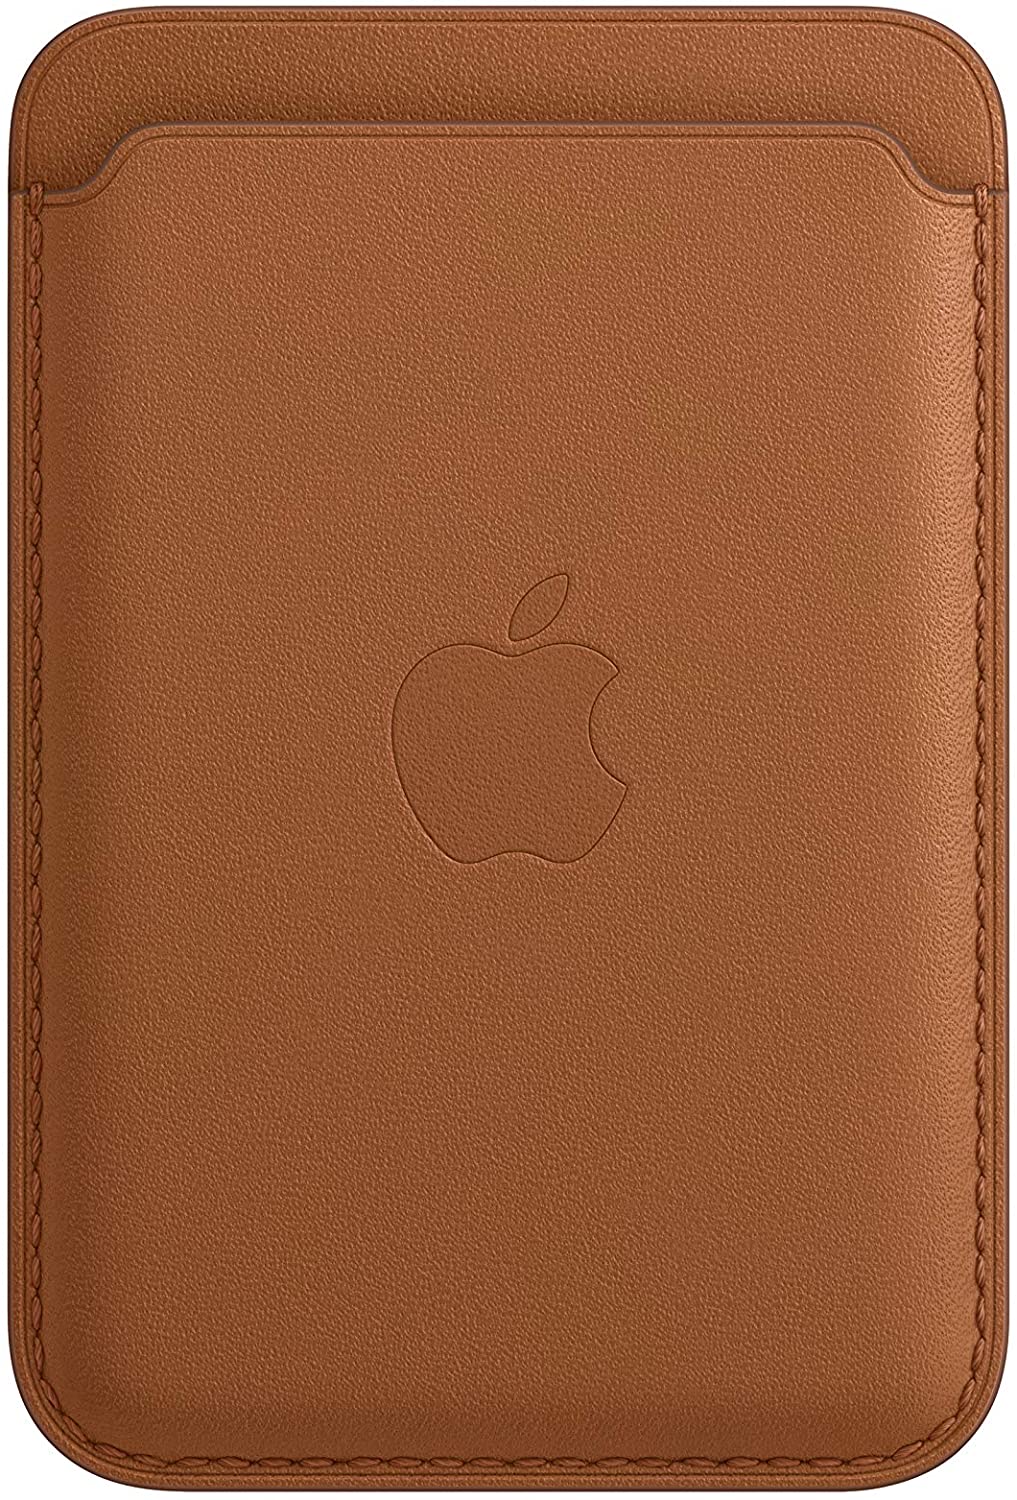 Apple Leather Wallet with MagSafe for iPhone, MHLT3ZM/A - Saddle Brown (New)